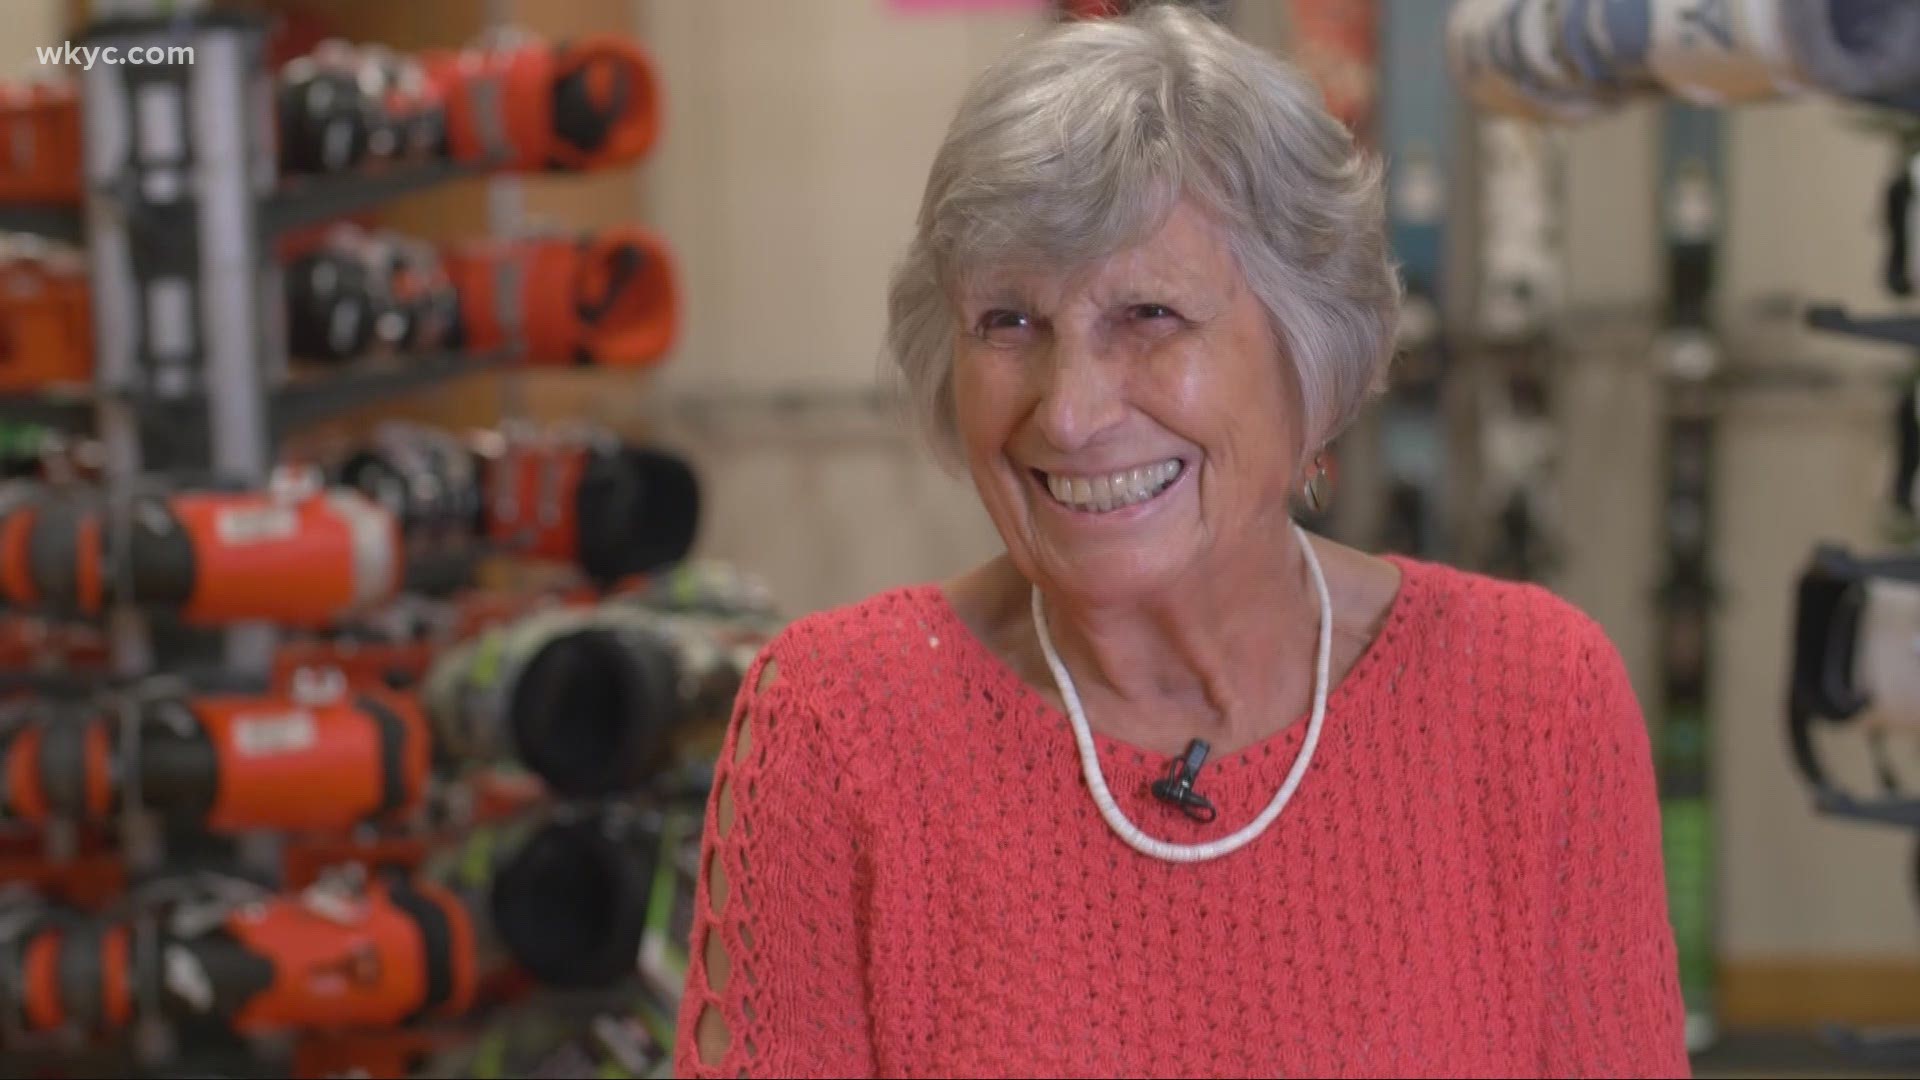 Lilly Kron set swimming records in her 50s, then did it again in her 70s.